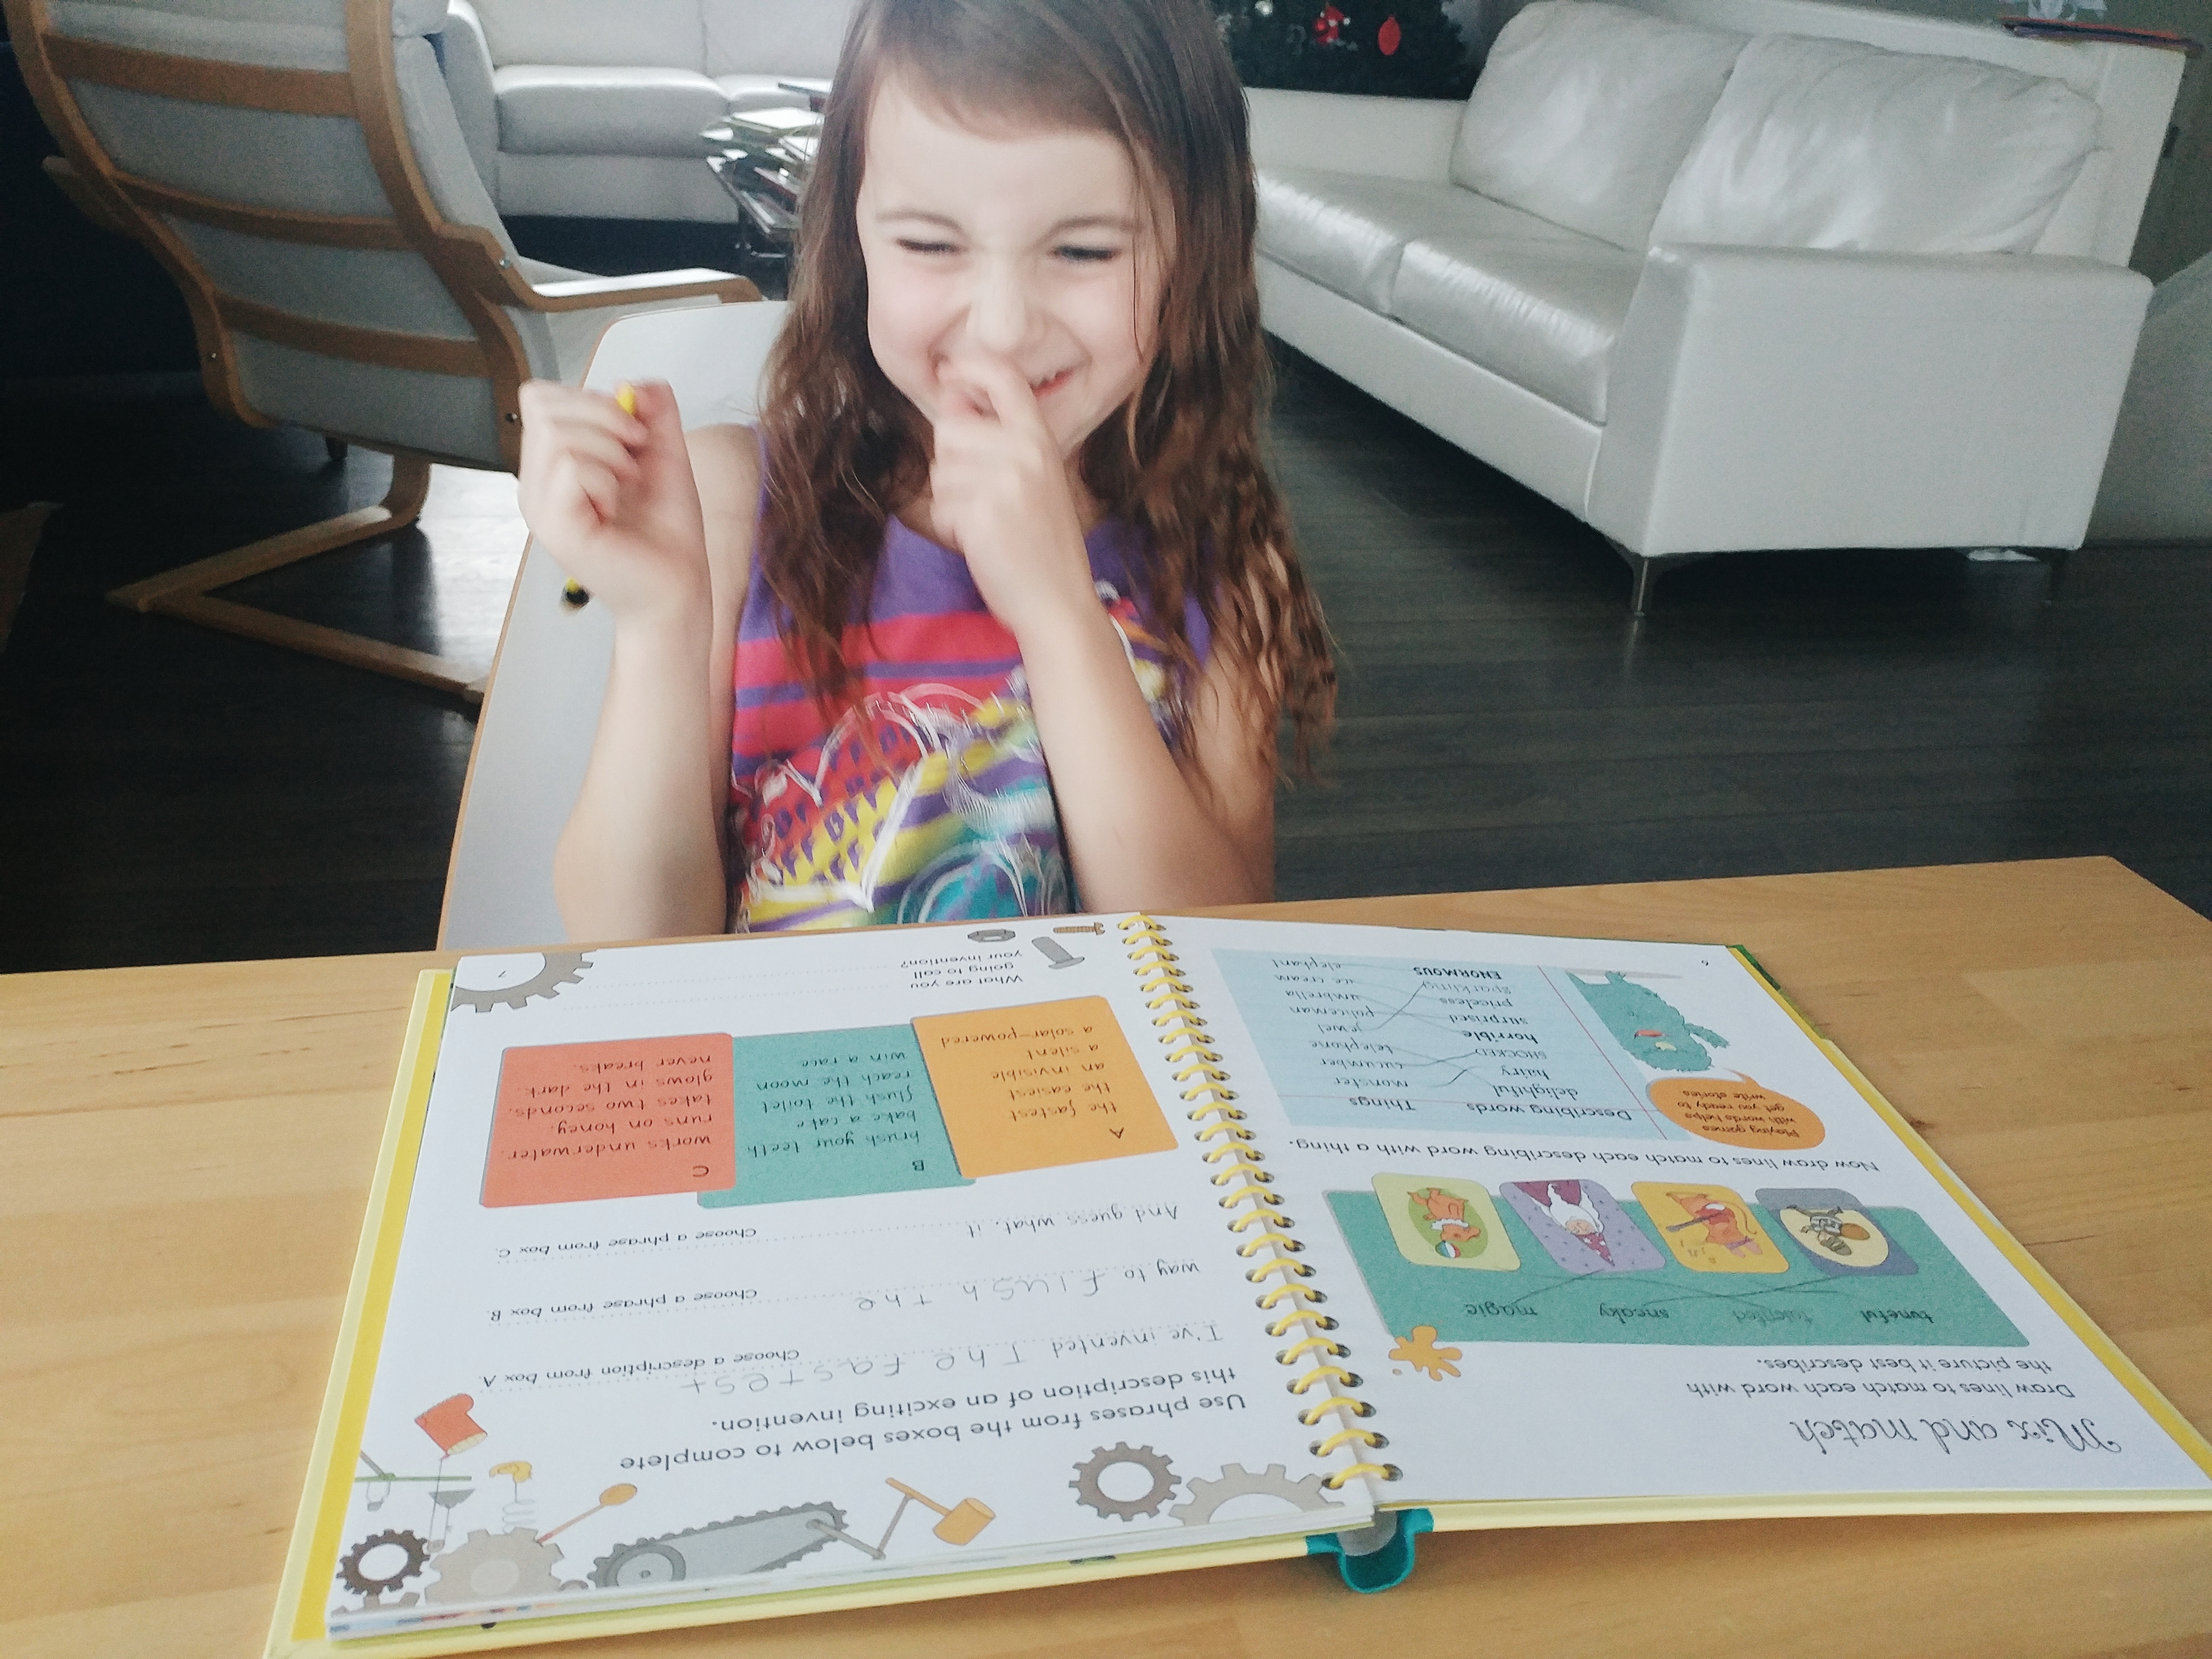 How to Plan Your Homeschool Year with Broad Homeschool Goals Instead of Using a Curriculum